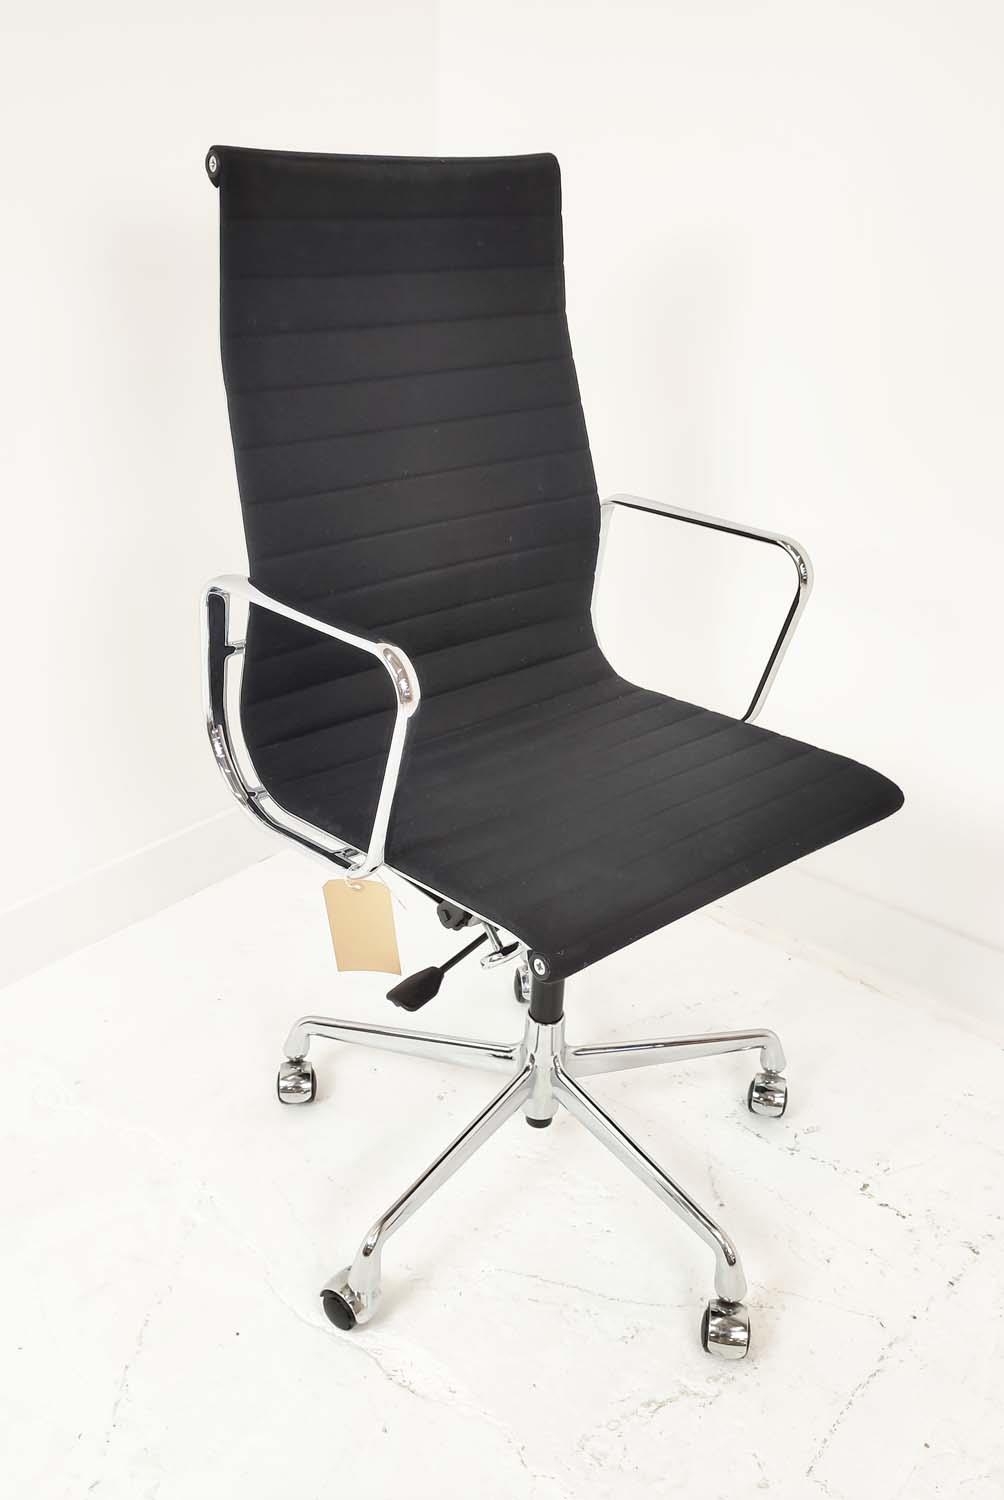 VITRA ALUMINIUM GROUP CHAIR, by Charles and Ray Eames, 113.5cm H at largest.